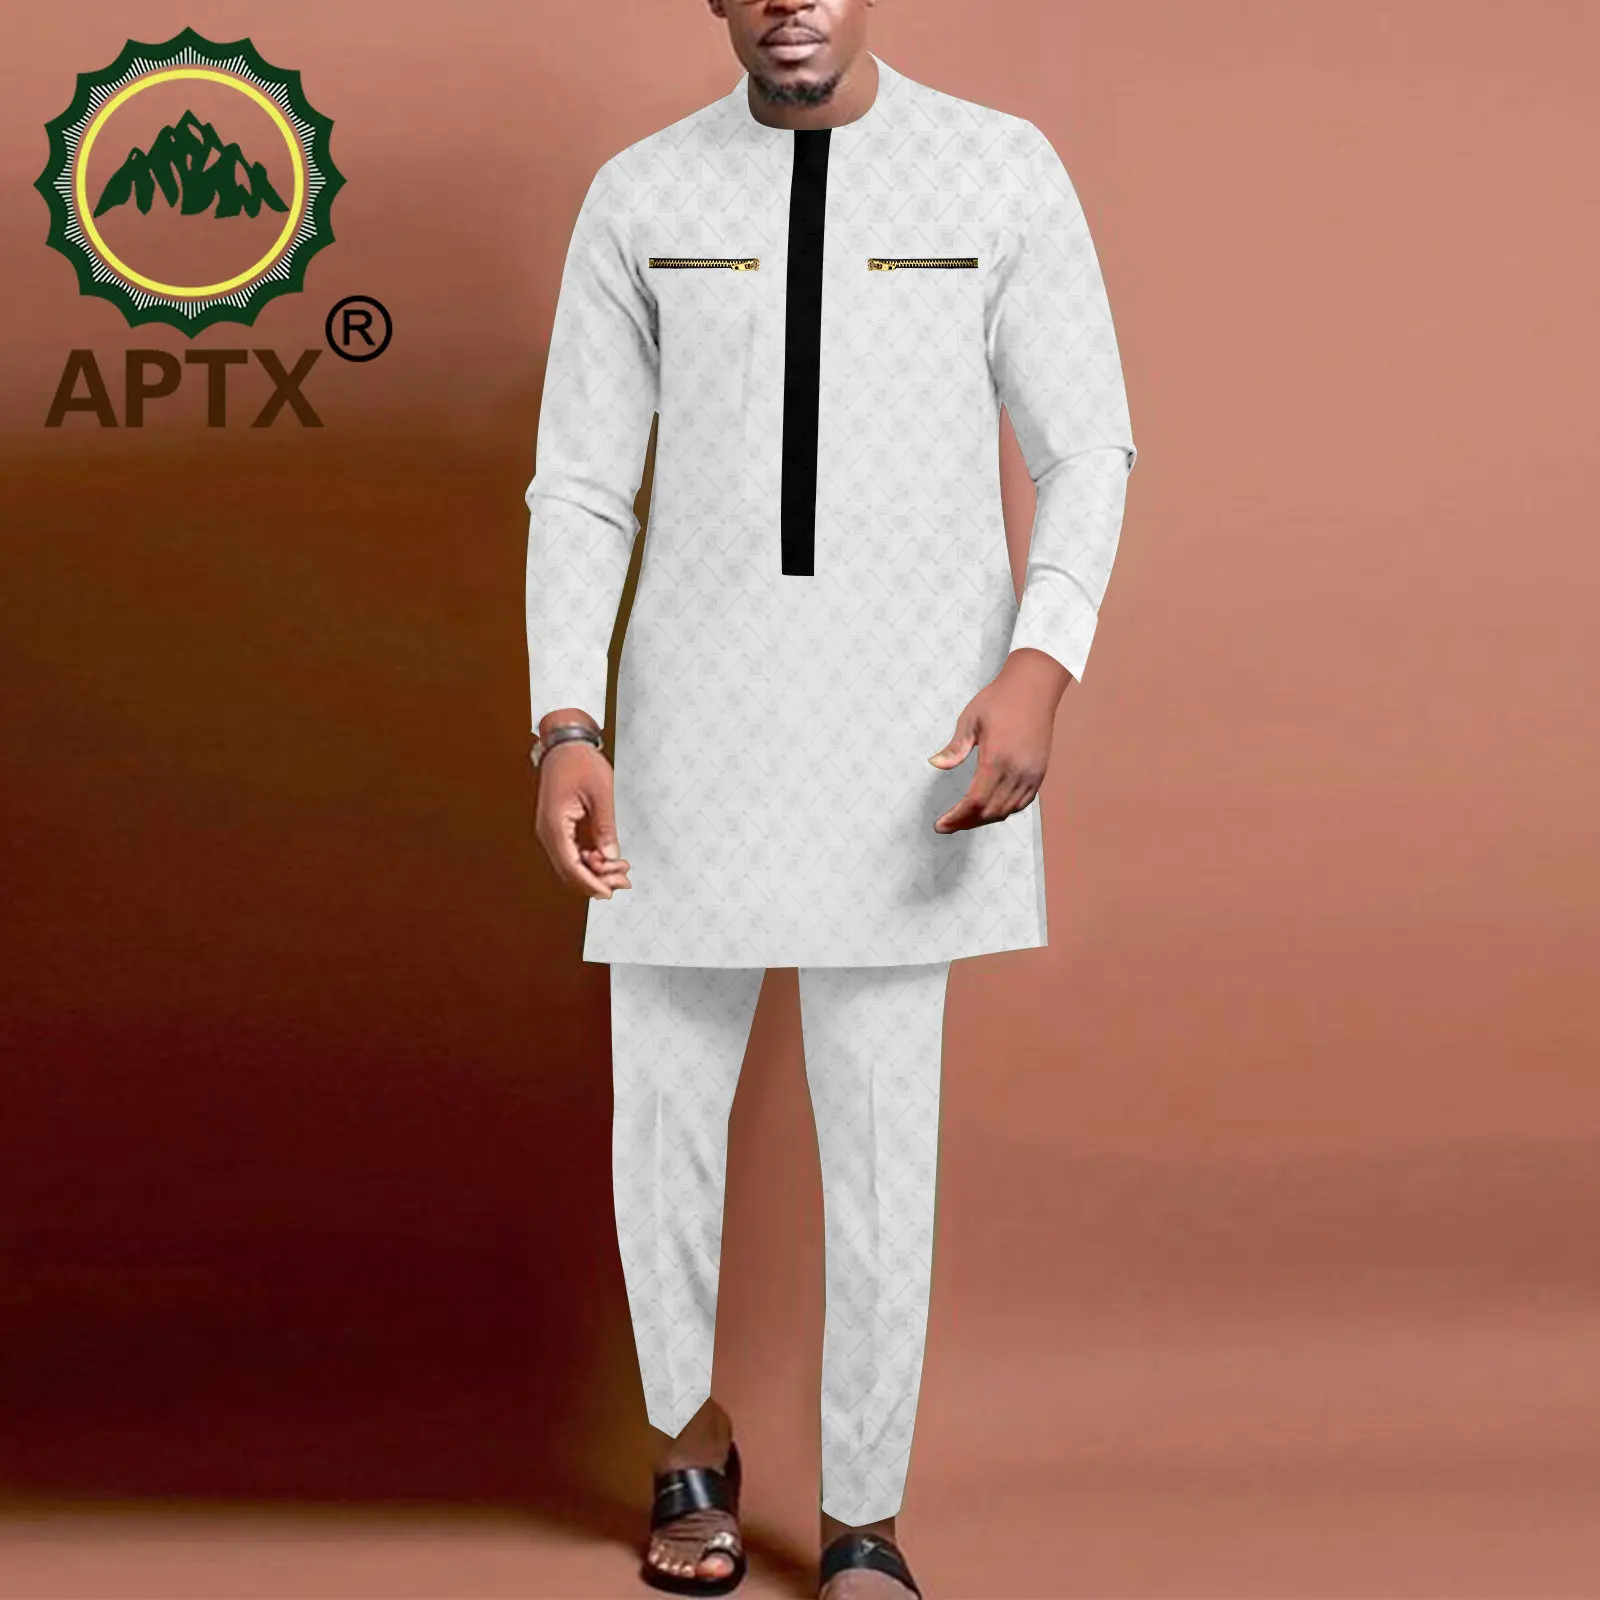 APTX African Jacquard Clothing for Men Long Top+Full Length Pants 2 Pieces Casual Srt with Metal Zipper Decoration TA2216130